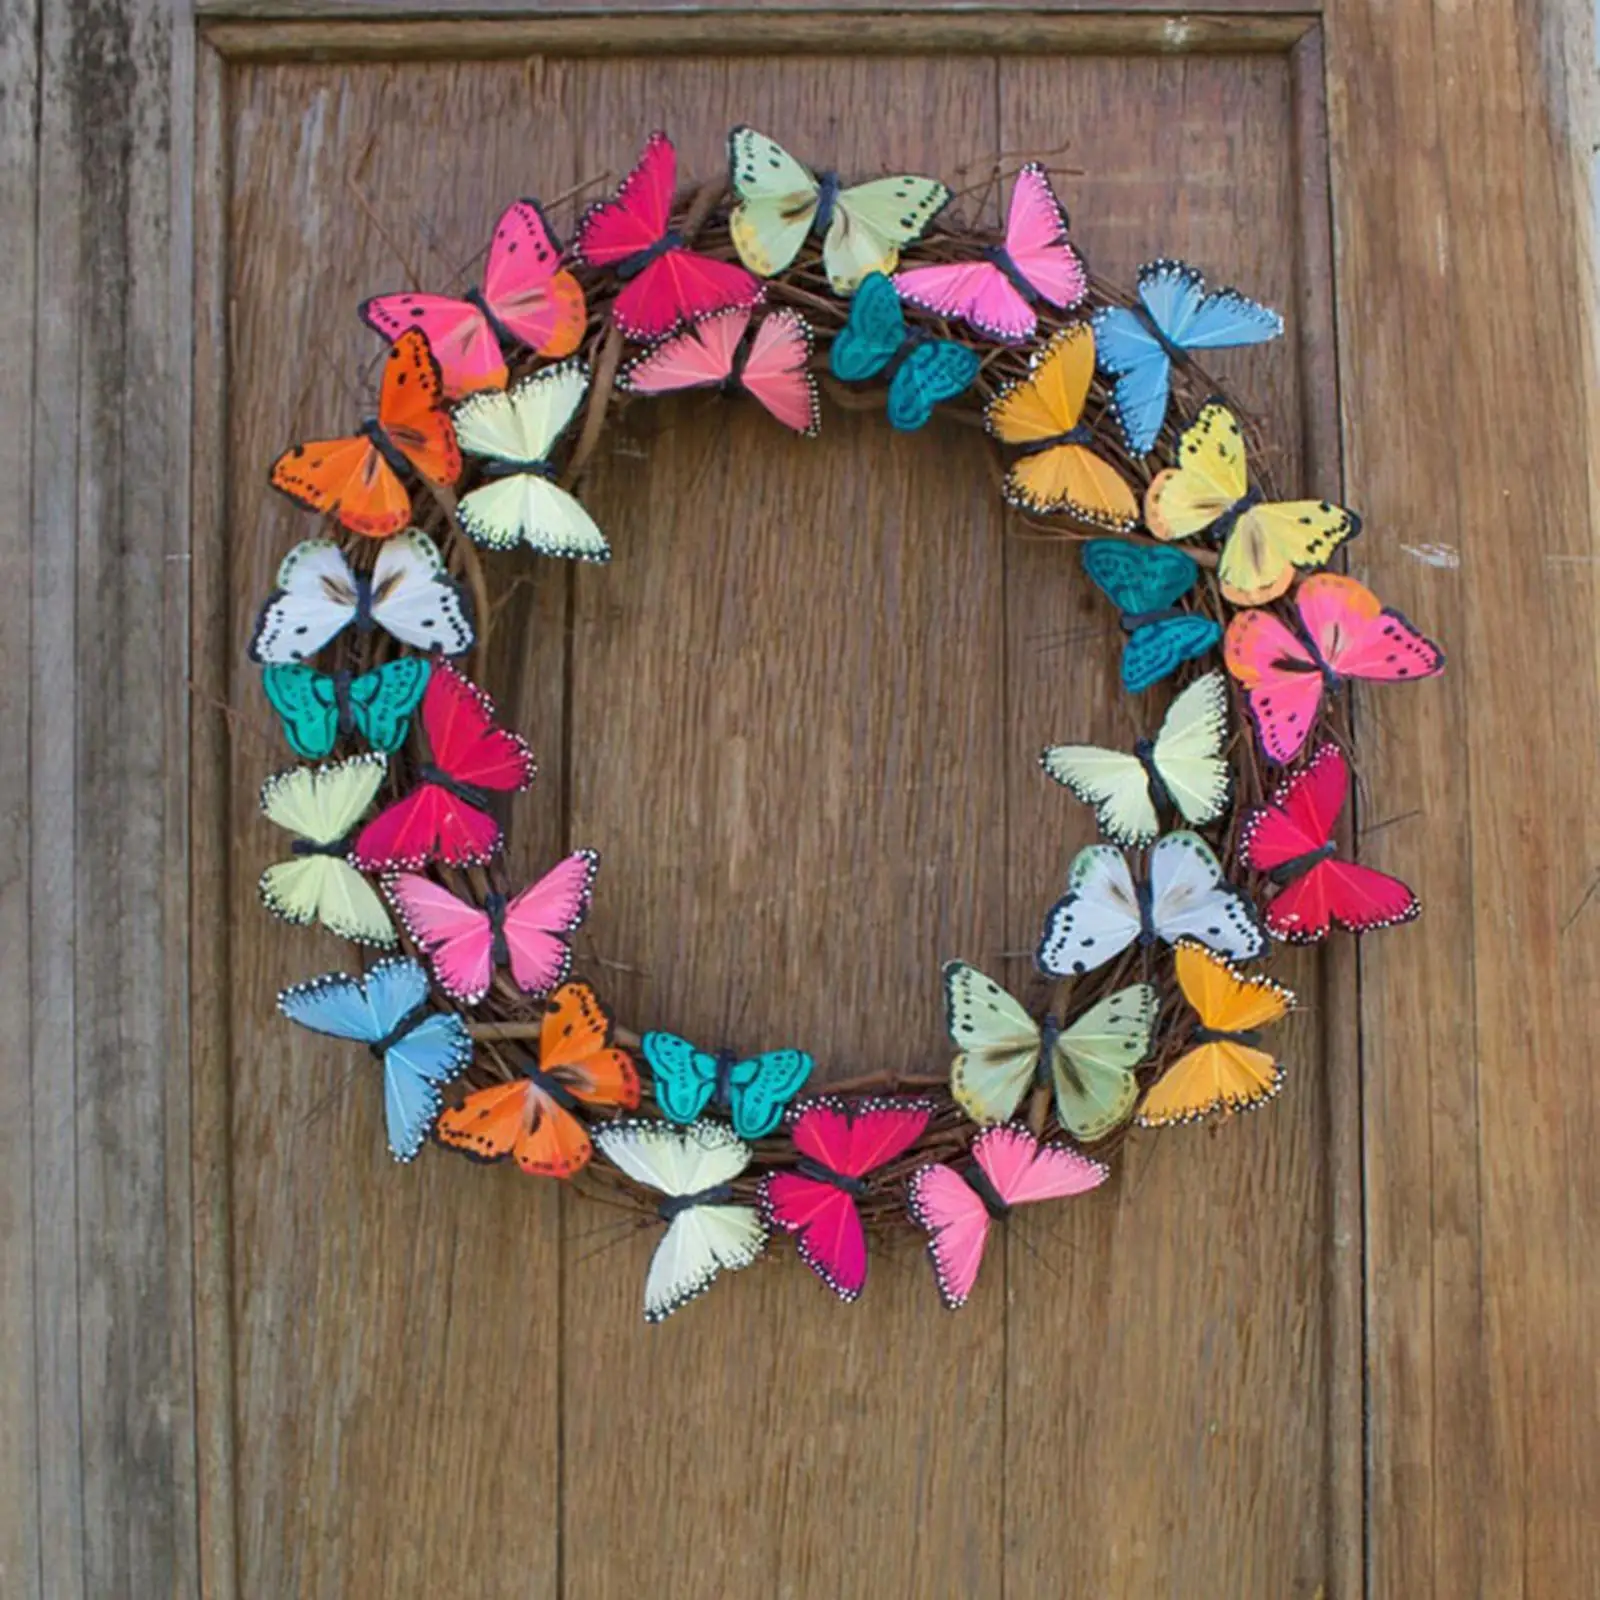 Round Colorful 15inch Butterfly Wreath for Front Door Wall Hanging Garland Mantle Festival Spring Ornament